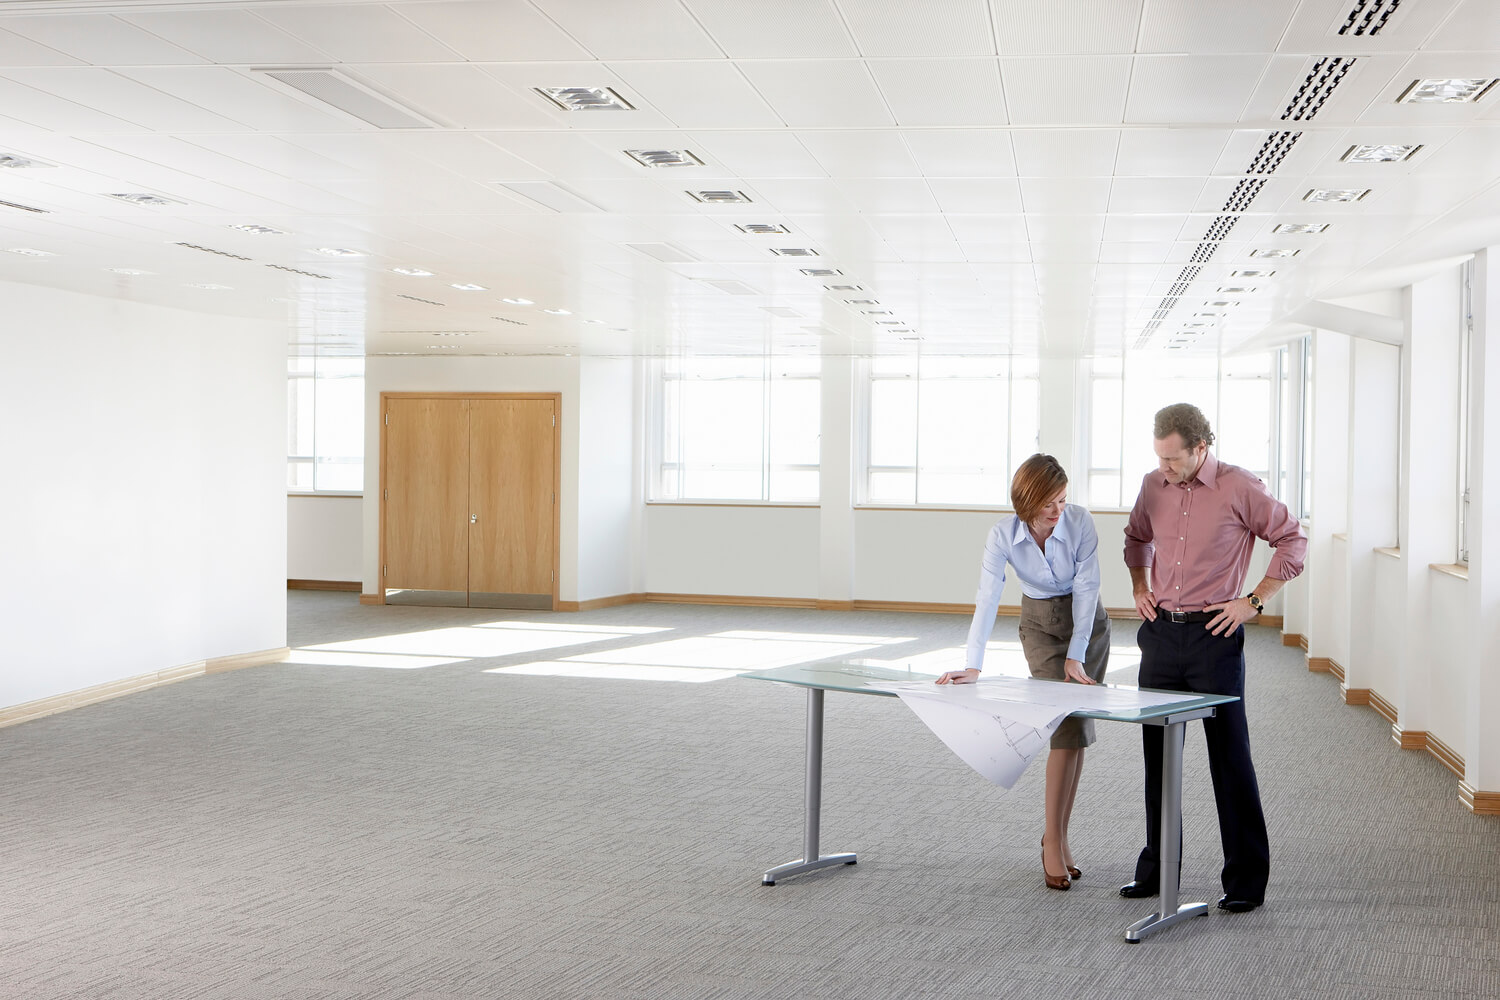 Do associate opinions matter in the design of law firm office space?